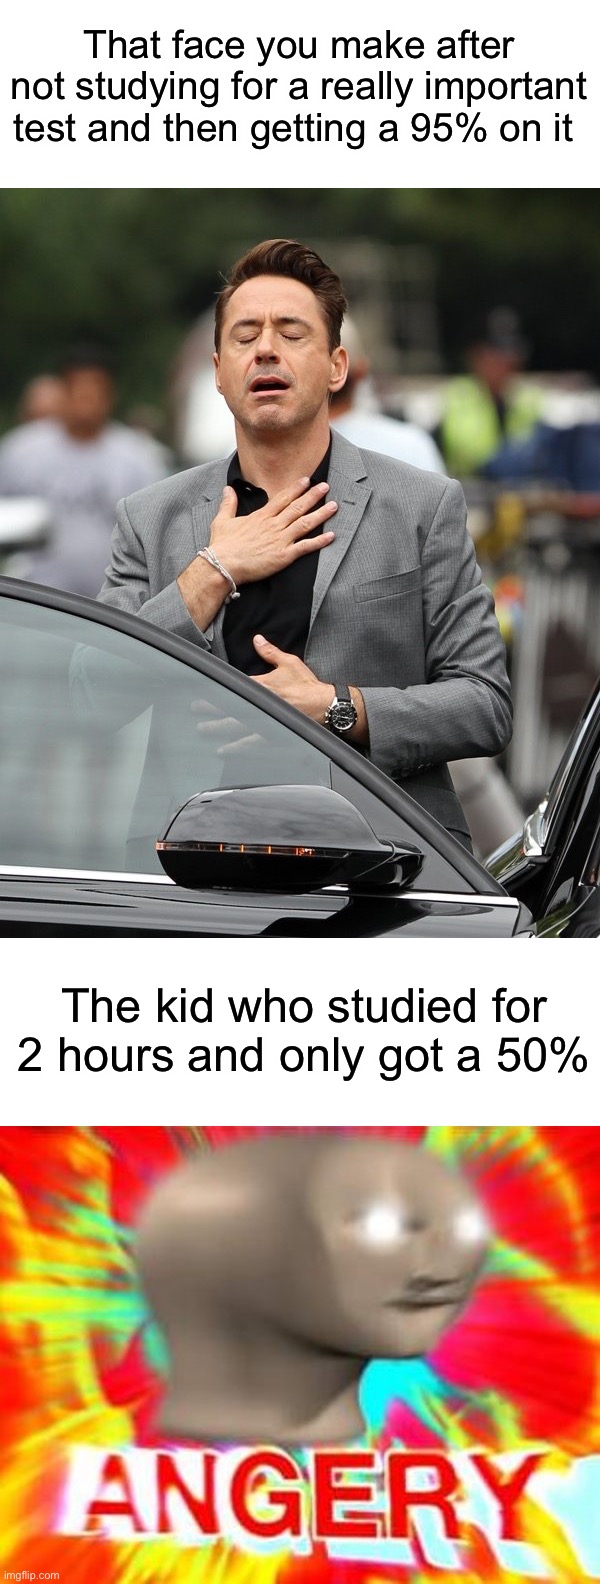 Relieved, angery |  That face you make after not studying for a really important test and then getting a 95% on it; The kid who studied for 2 hours and only got a 50% | image tagged in relief,surreal angery,memes,funny,angery,happy | made w/ Imgflip meme maker